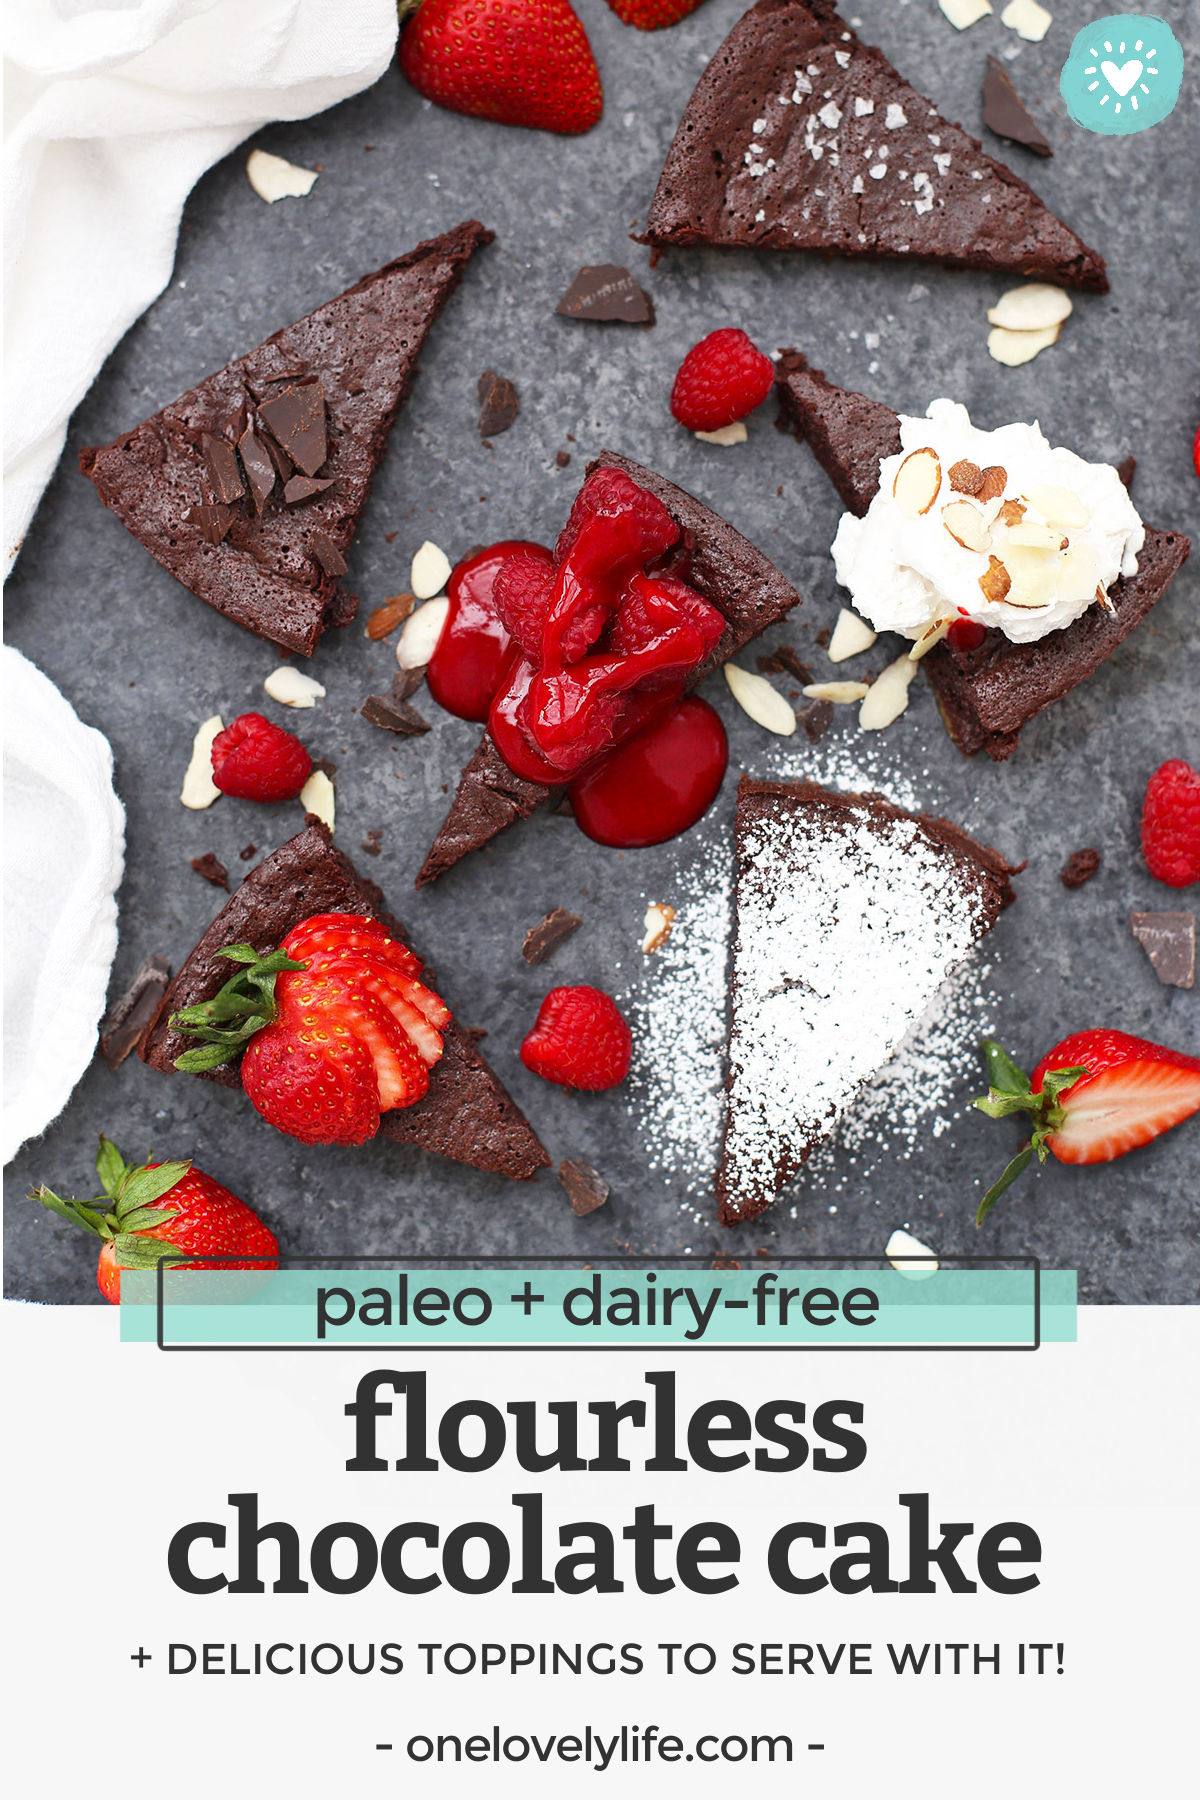 Flourless Chocolate Cake - This dense, perfectly rich chocolate cake is gluten free, dairy free, and naturally sweetened, but has all the indulgent decadence you're looking for on a special occasion. Pro tip: don't skip the raspberry sauce! // dairy free flourless chocolate cake recipe // paleo flourless chocolate cake // gluten free flourless chocolate cake // paleo chocolate cake // gluten free chocolate cake